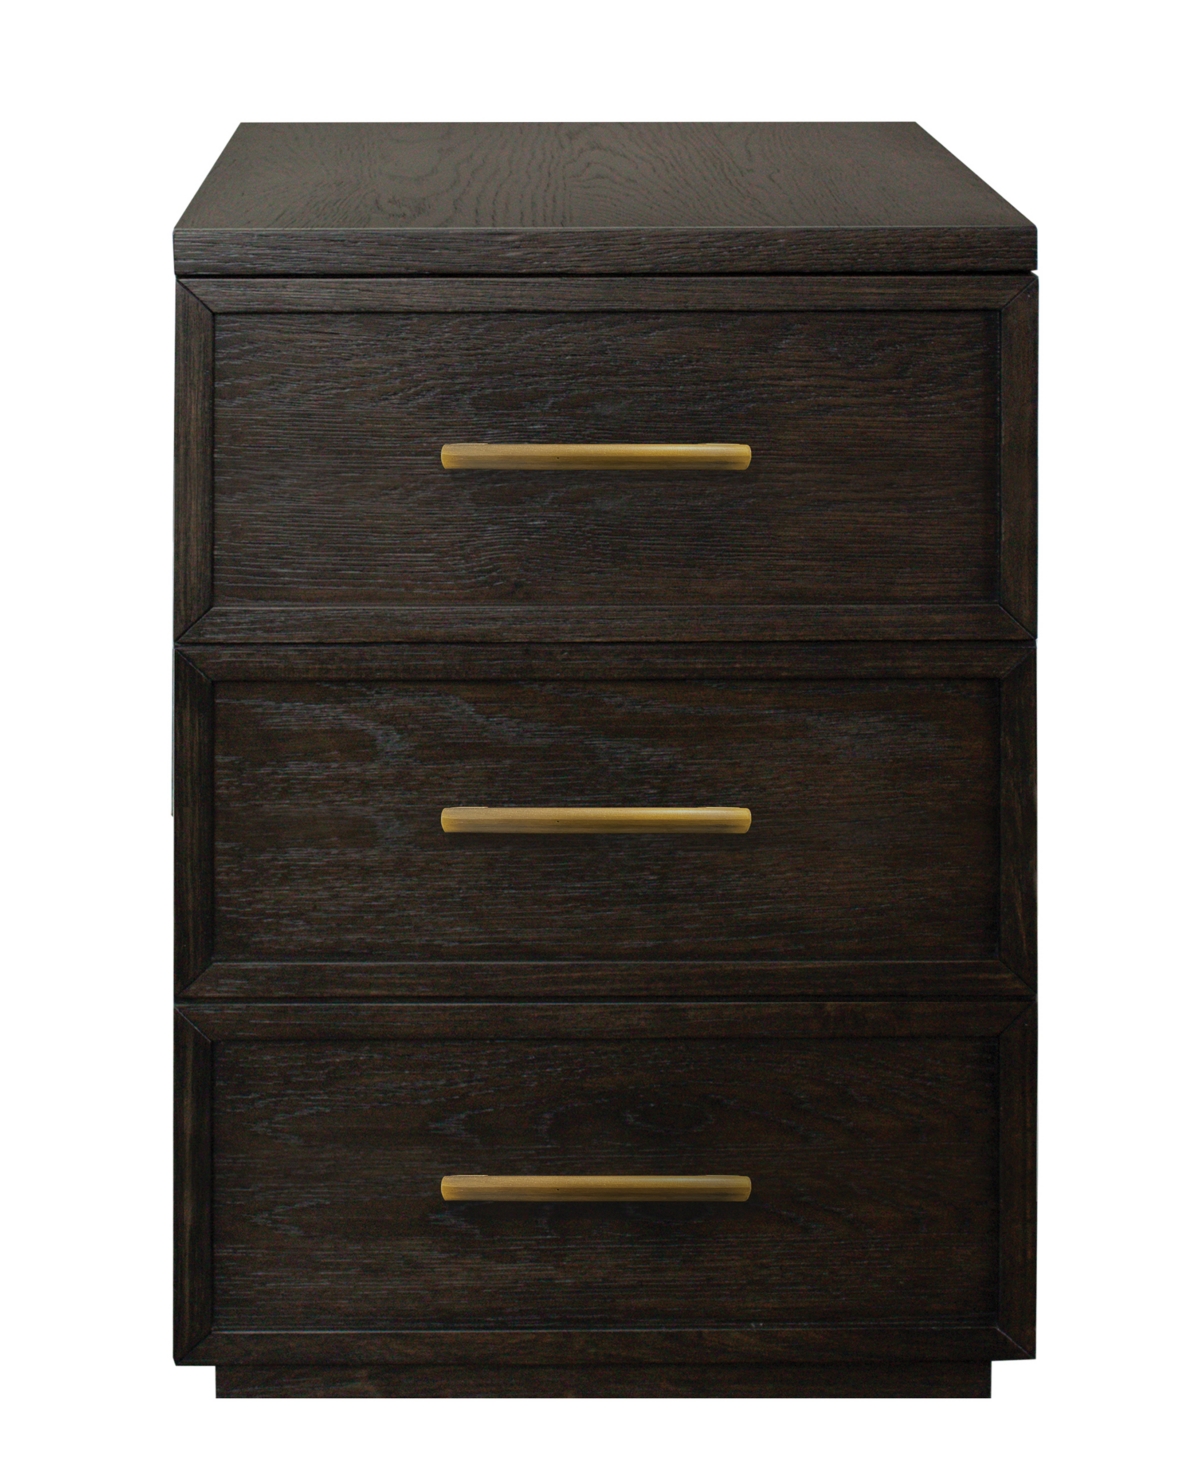 Furniture Fresh Perspectives 24" Wood Dovetail Joinery Mobile File Cabinet In Umber